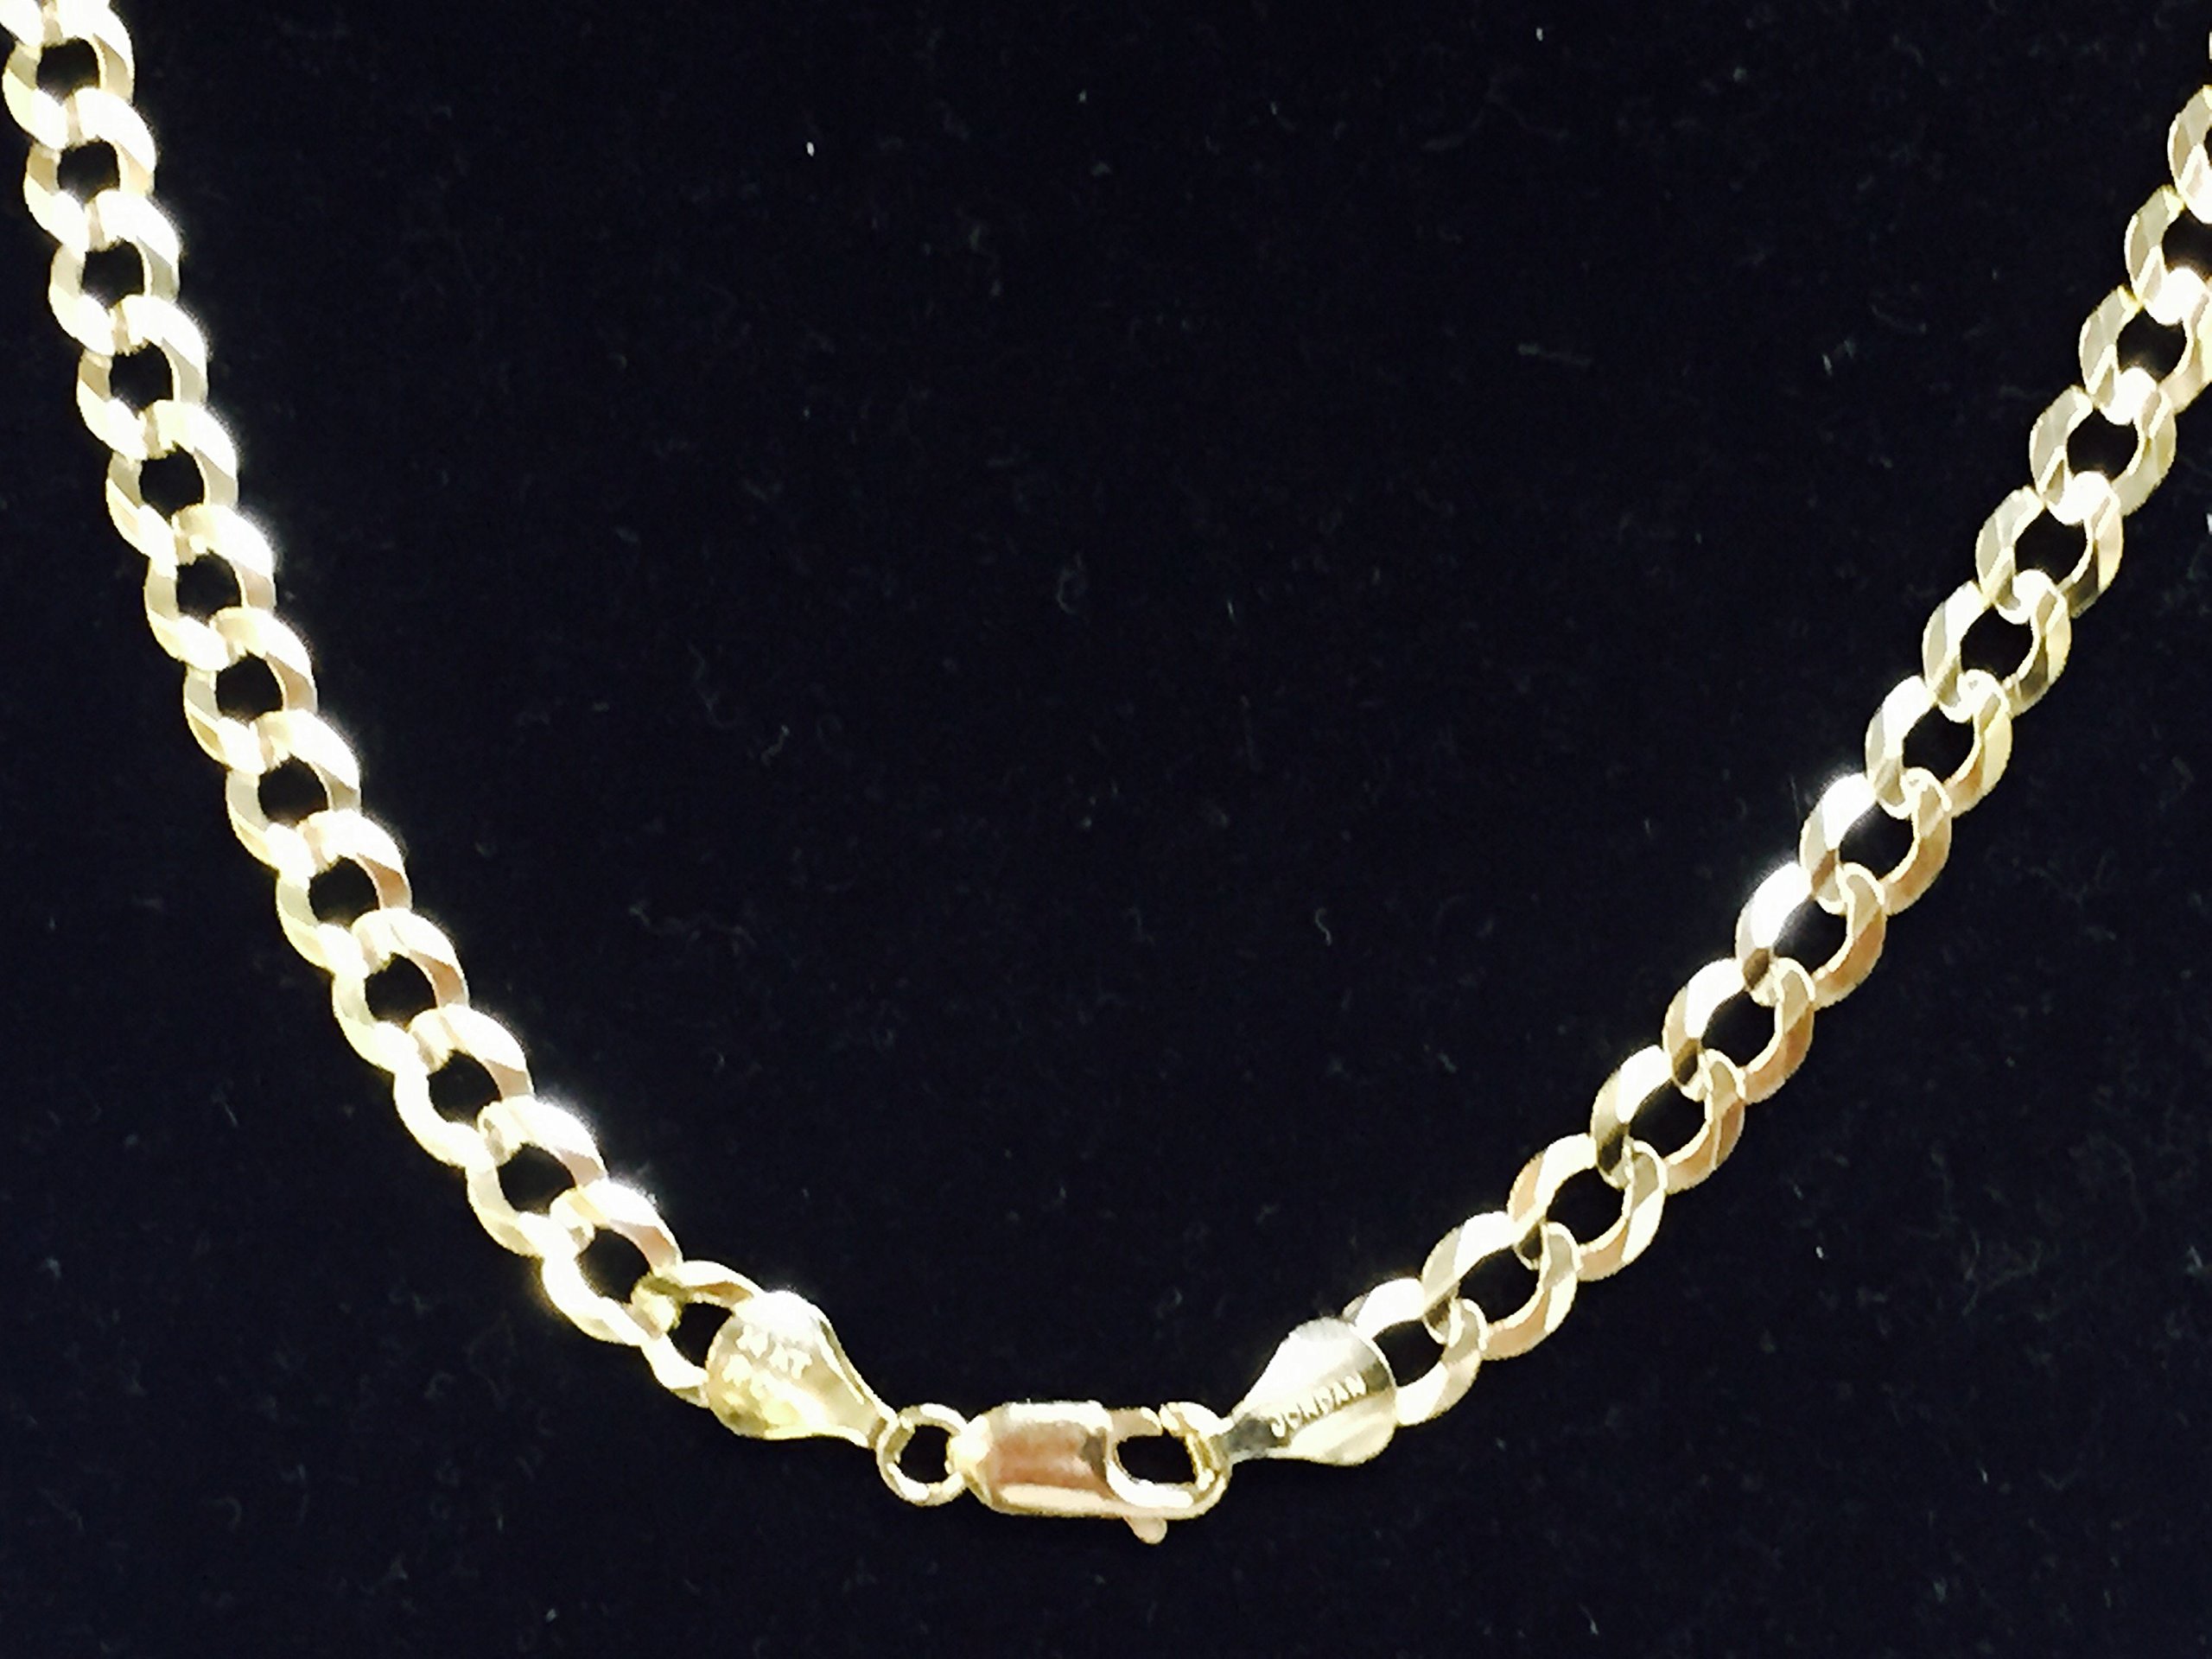 14K Solid Yellow Gold Comfort Concave Cuban Curb Link Chain Necklace 4.7 Mm Cc120 (26 Inches)